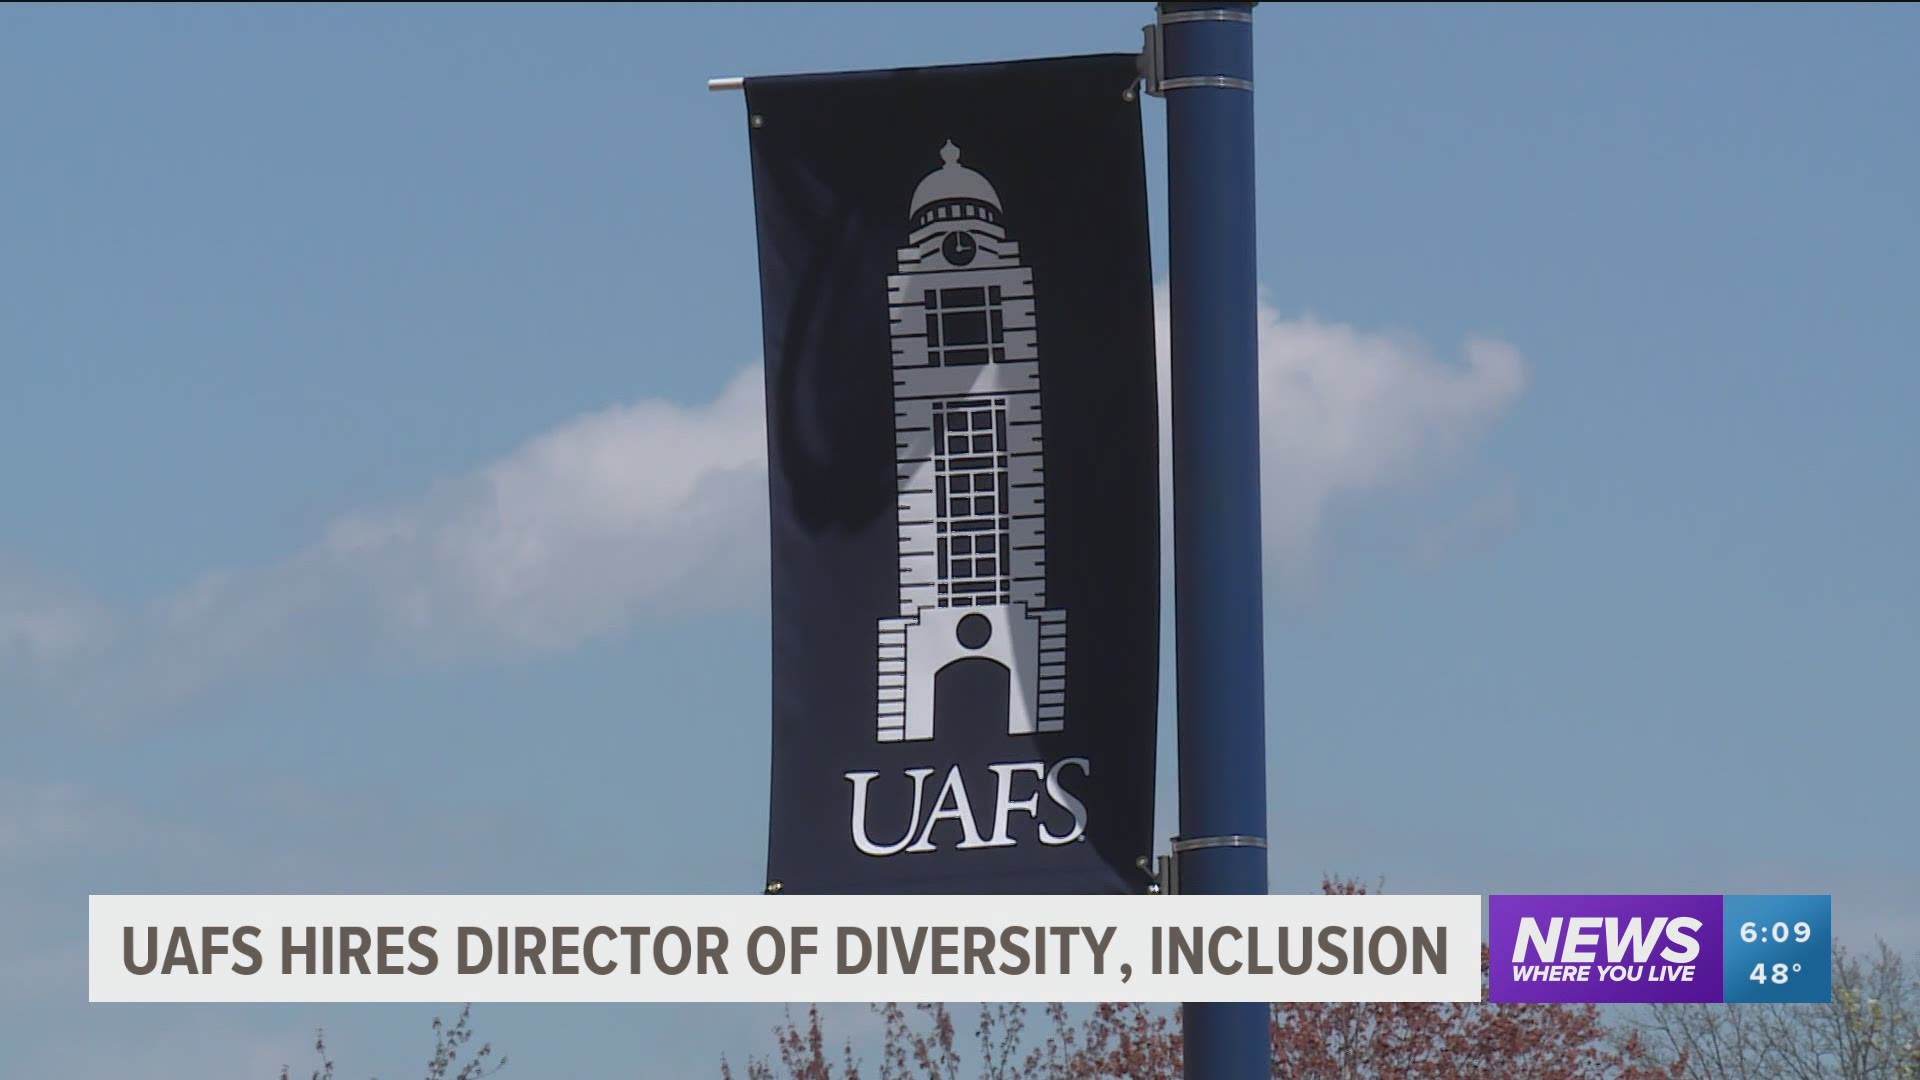 John Blue will serve as a member of senior administration, providing vision and counsel on diversity and inclusion initiatives and report directly to UAFS Chancellor